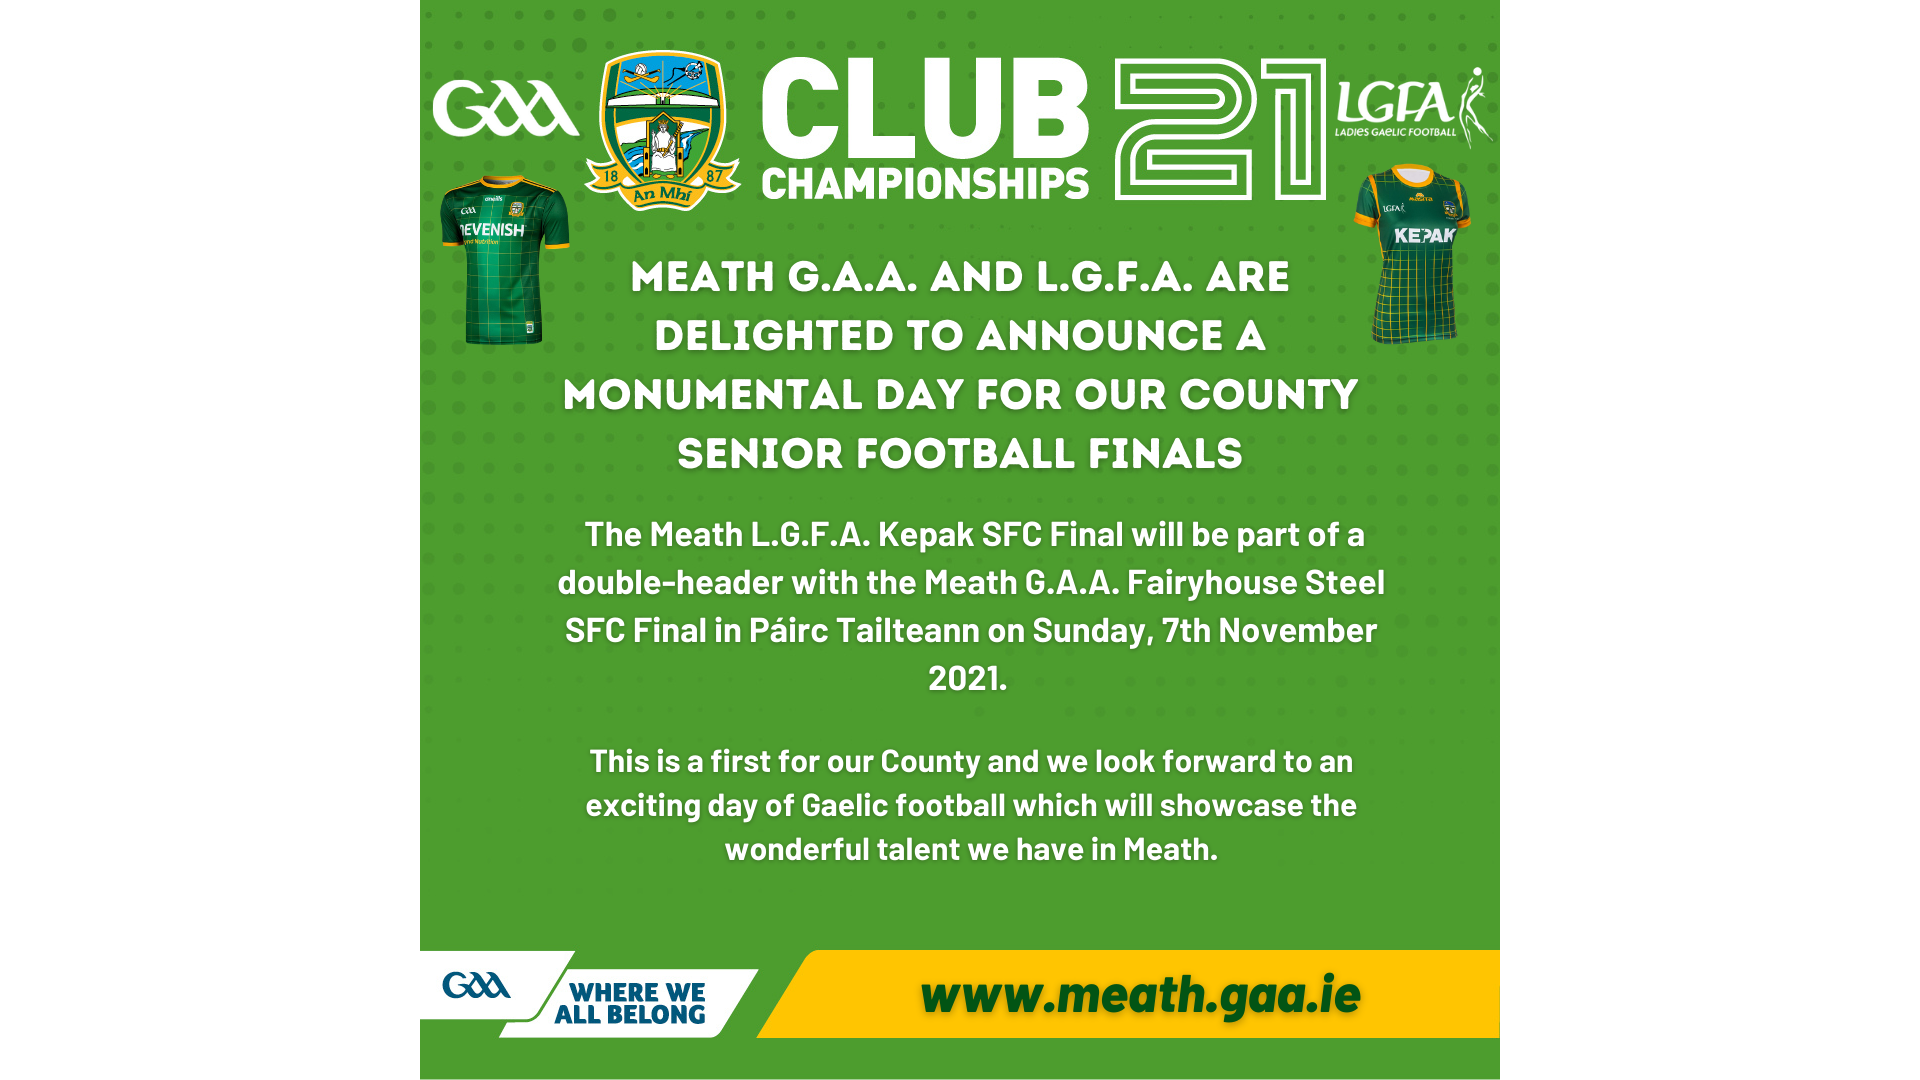 Meath G.A.A. and L.G.F.A. are delighted to announce a monumental day for our County Senior Football Finals